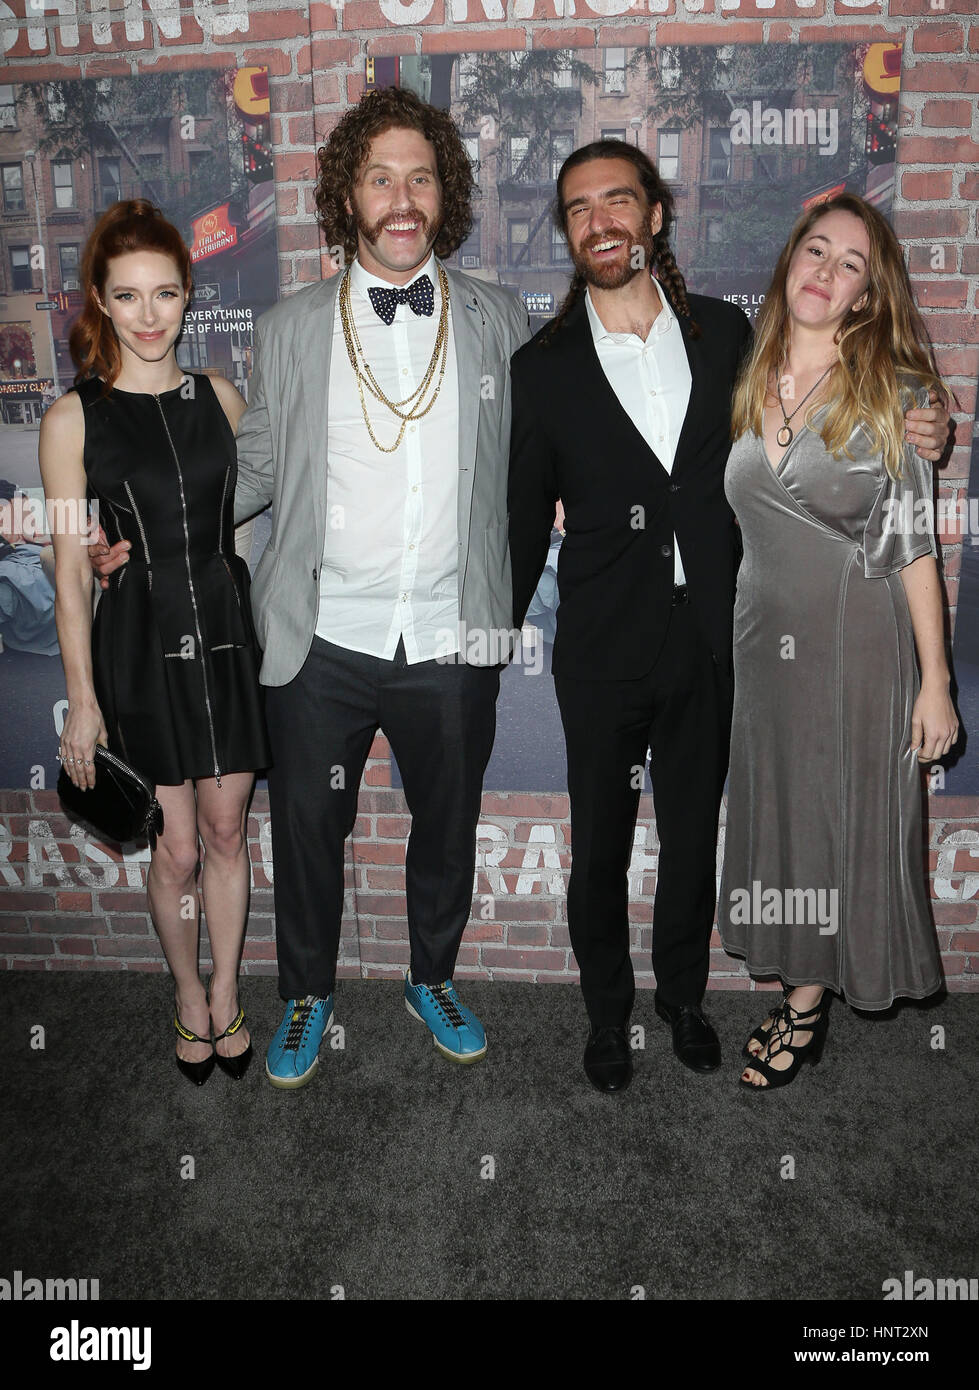 Hollywood, CA. 15 Feb, 2017. Kate Gorney, T.J. Miller, George Basil, Madeline Mack, a HBO 'crash' Premiere e After Party, all'Avalon In California il 15 febbraio 2017. Credito: Faye Sadou/media/punzone Alamy Live News Foto Stock